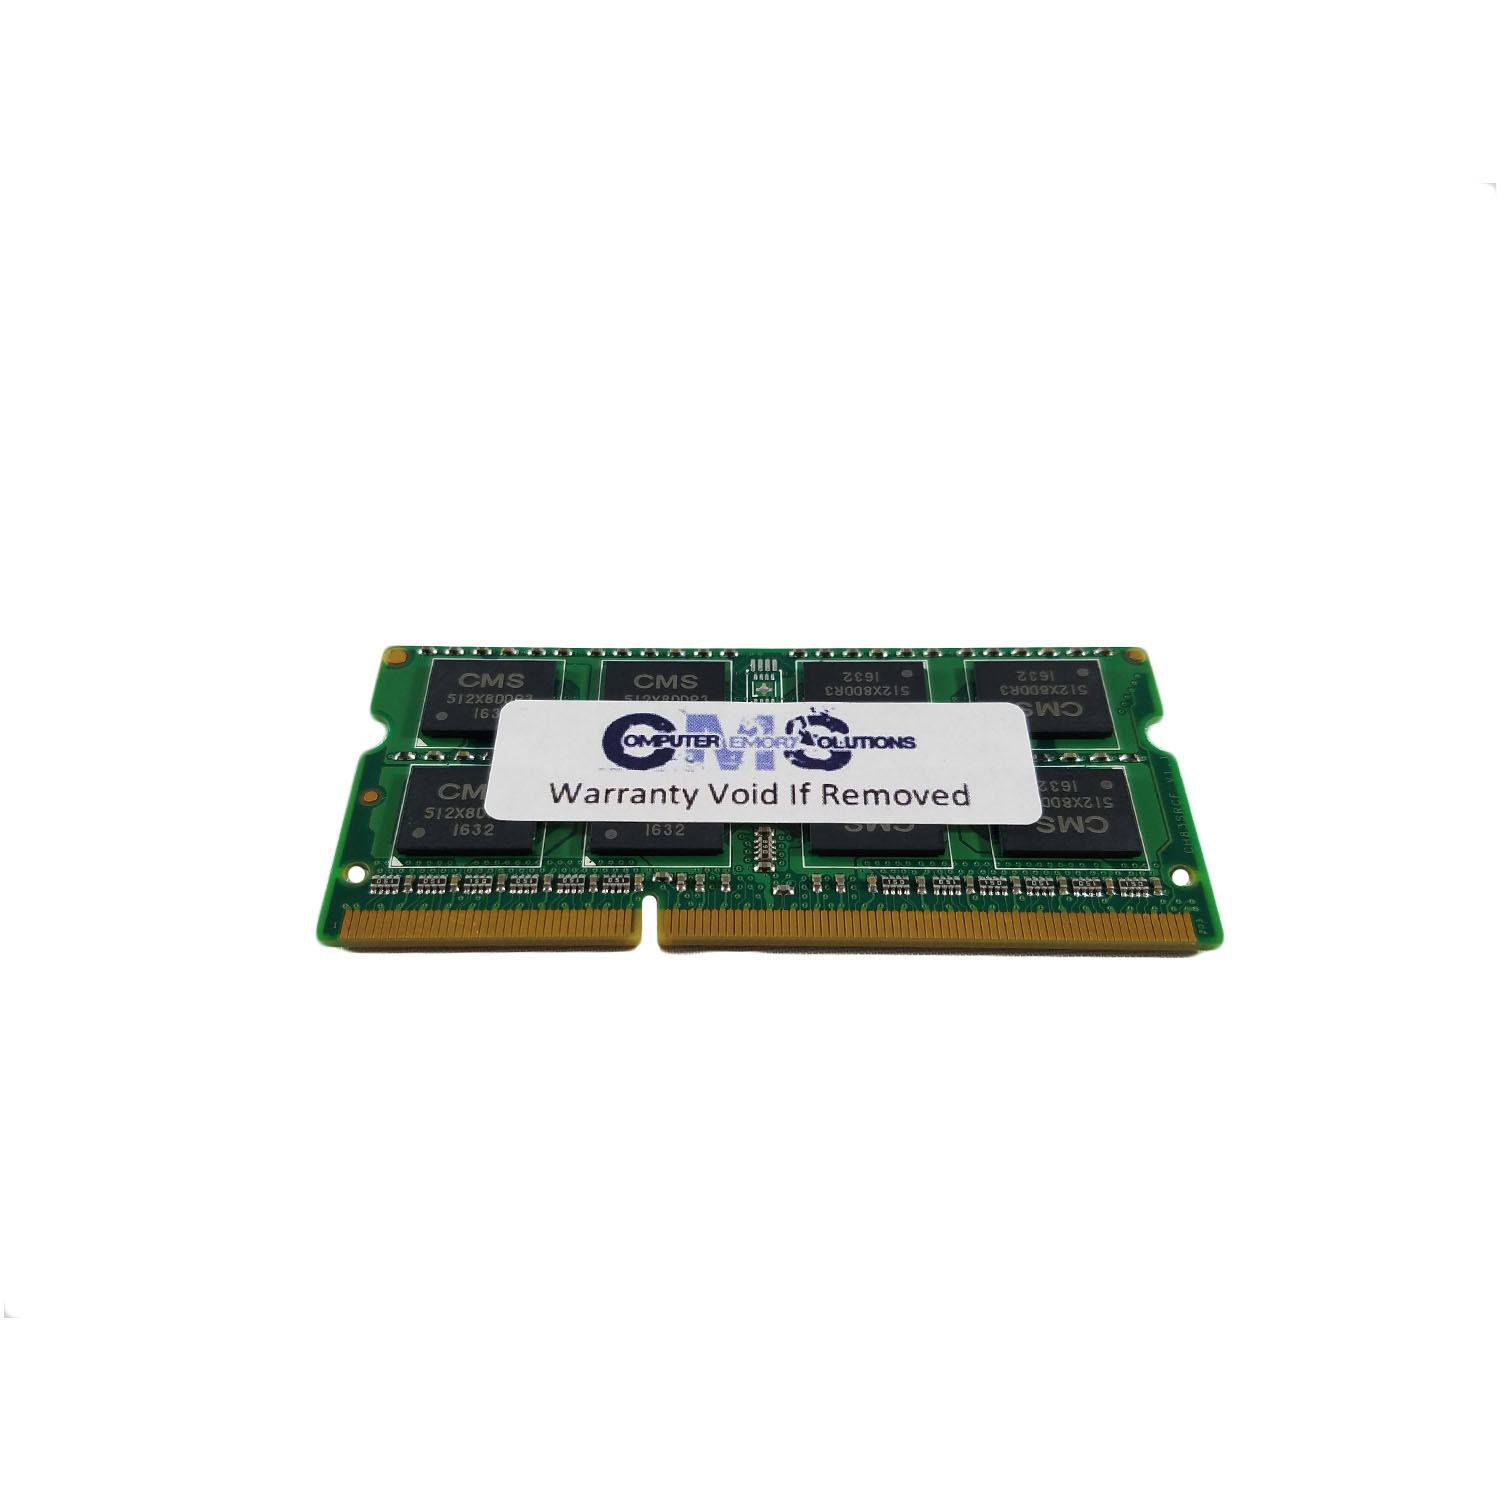 CMS 4GB (1X4GB) DDR3 12800 1600MHz NON ECC SODIMM Memory Ram Compatible with Dell Xps One 27 (2710) - A20 - image 2 of 3